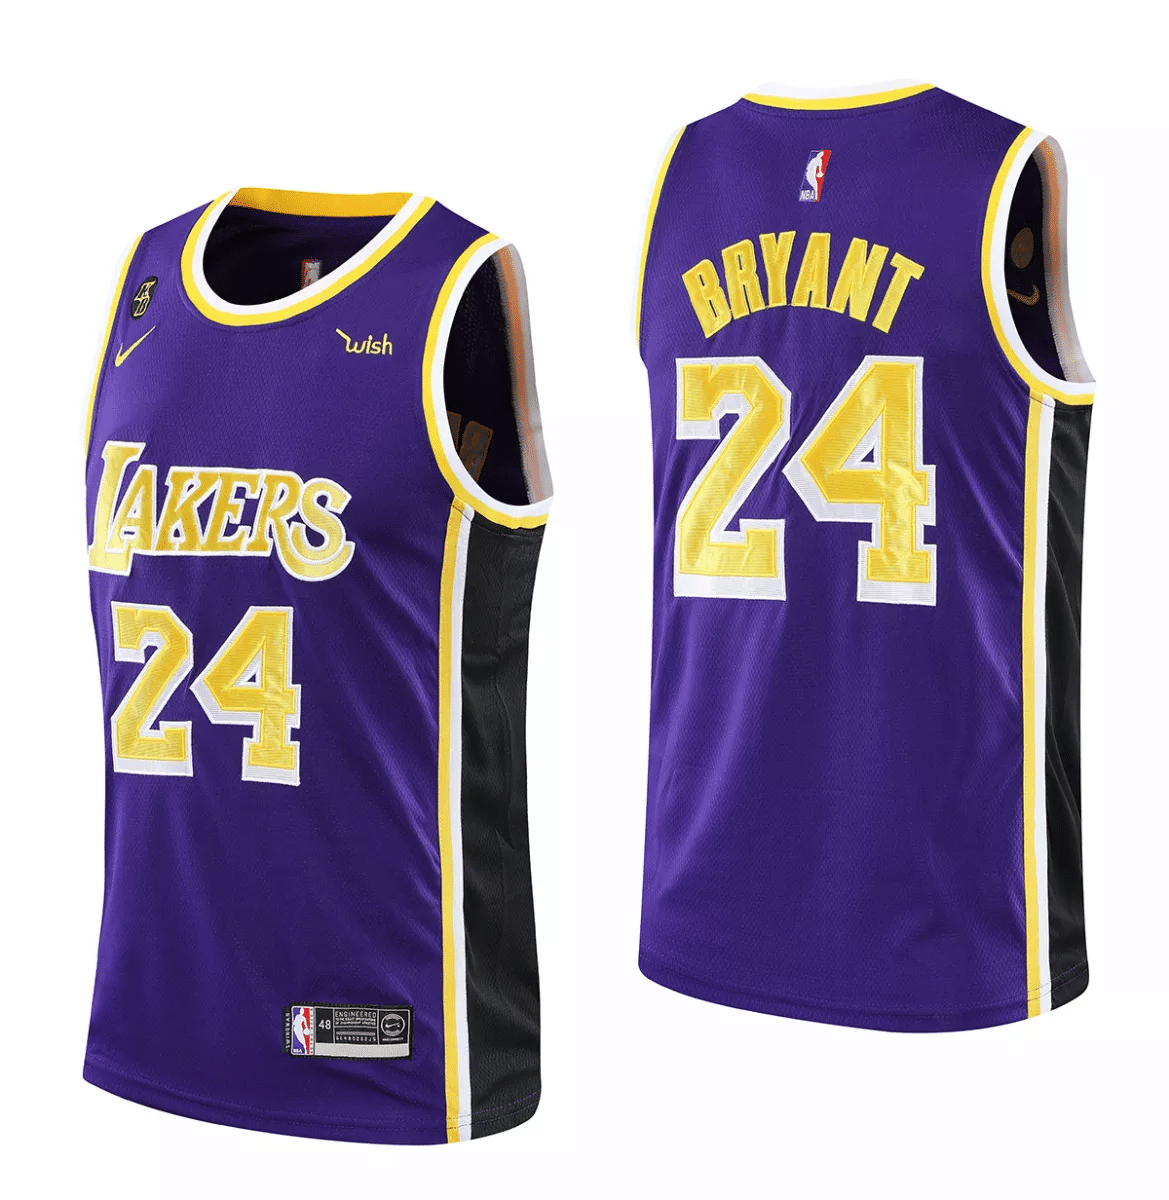 Kid's Los Angeles Lakers Kobe Bryant Authentic Jersey